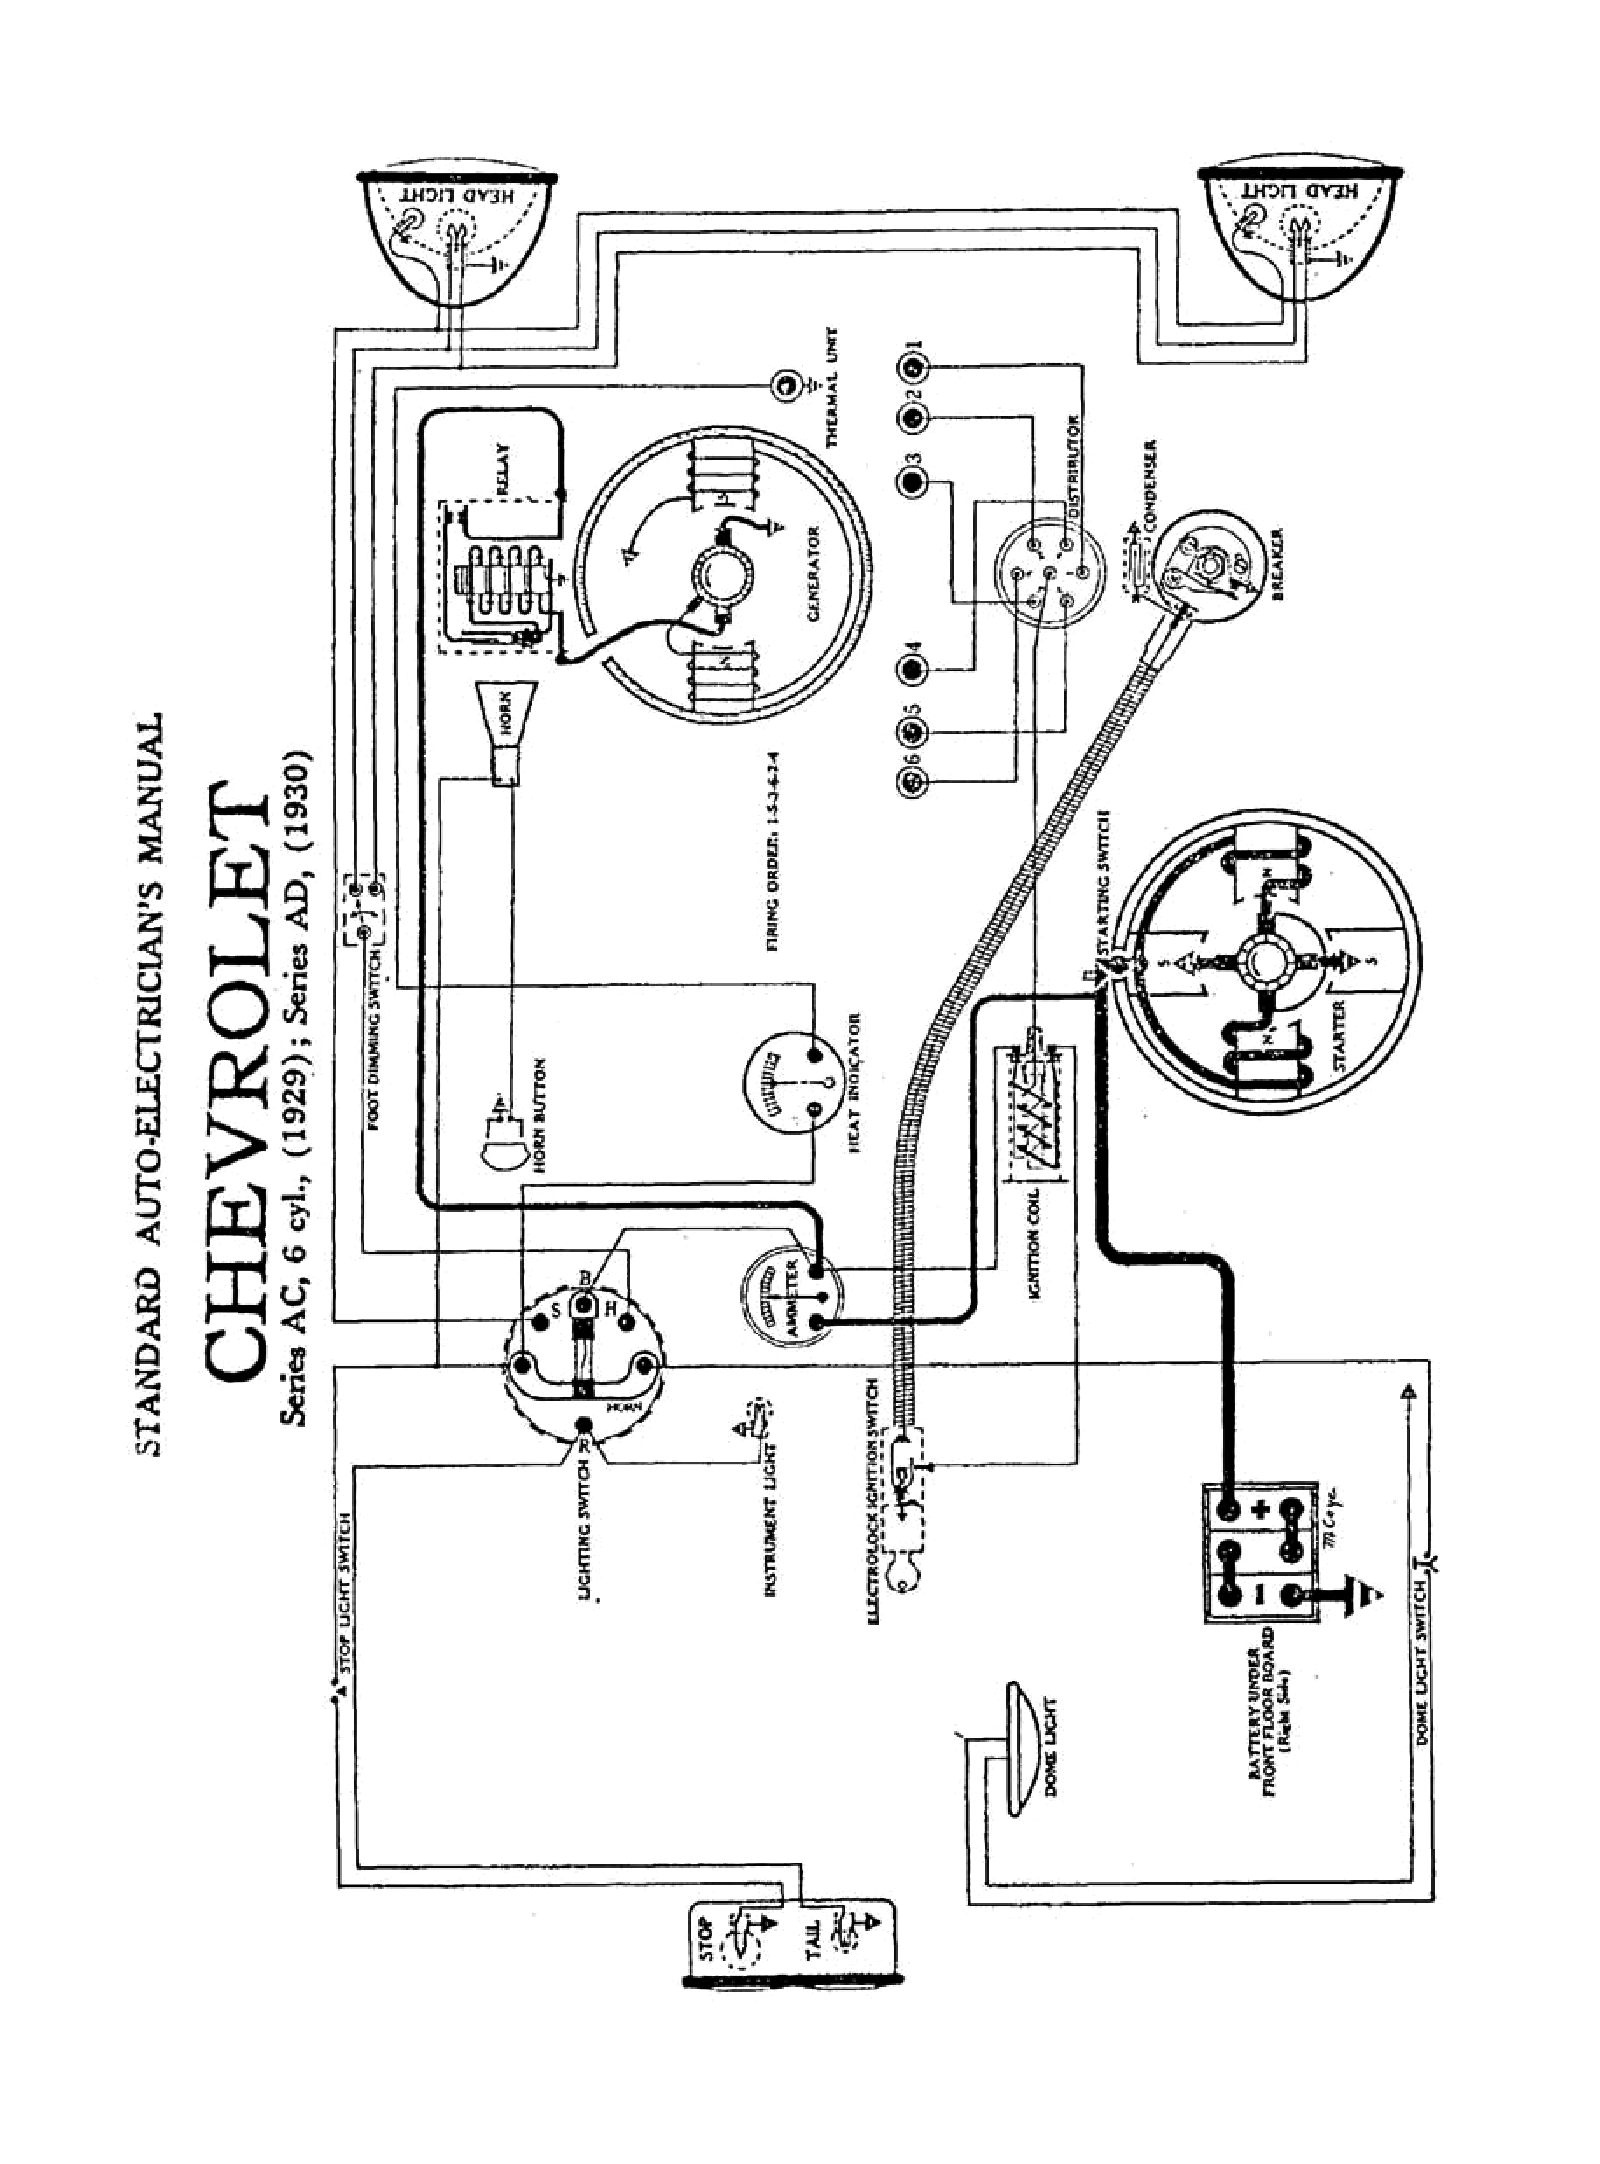 F6Dbc 1939 Ford Truck Wiring Diagram | Wiring Resources